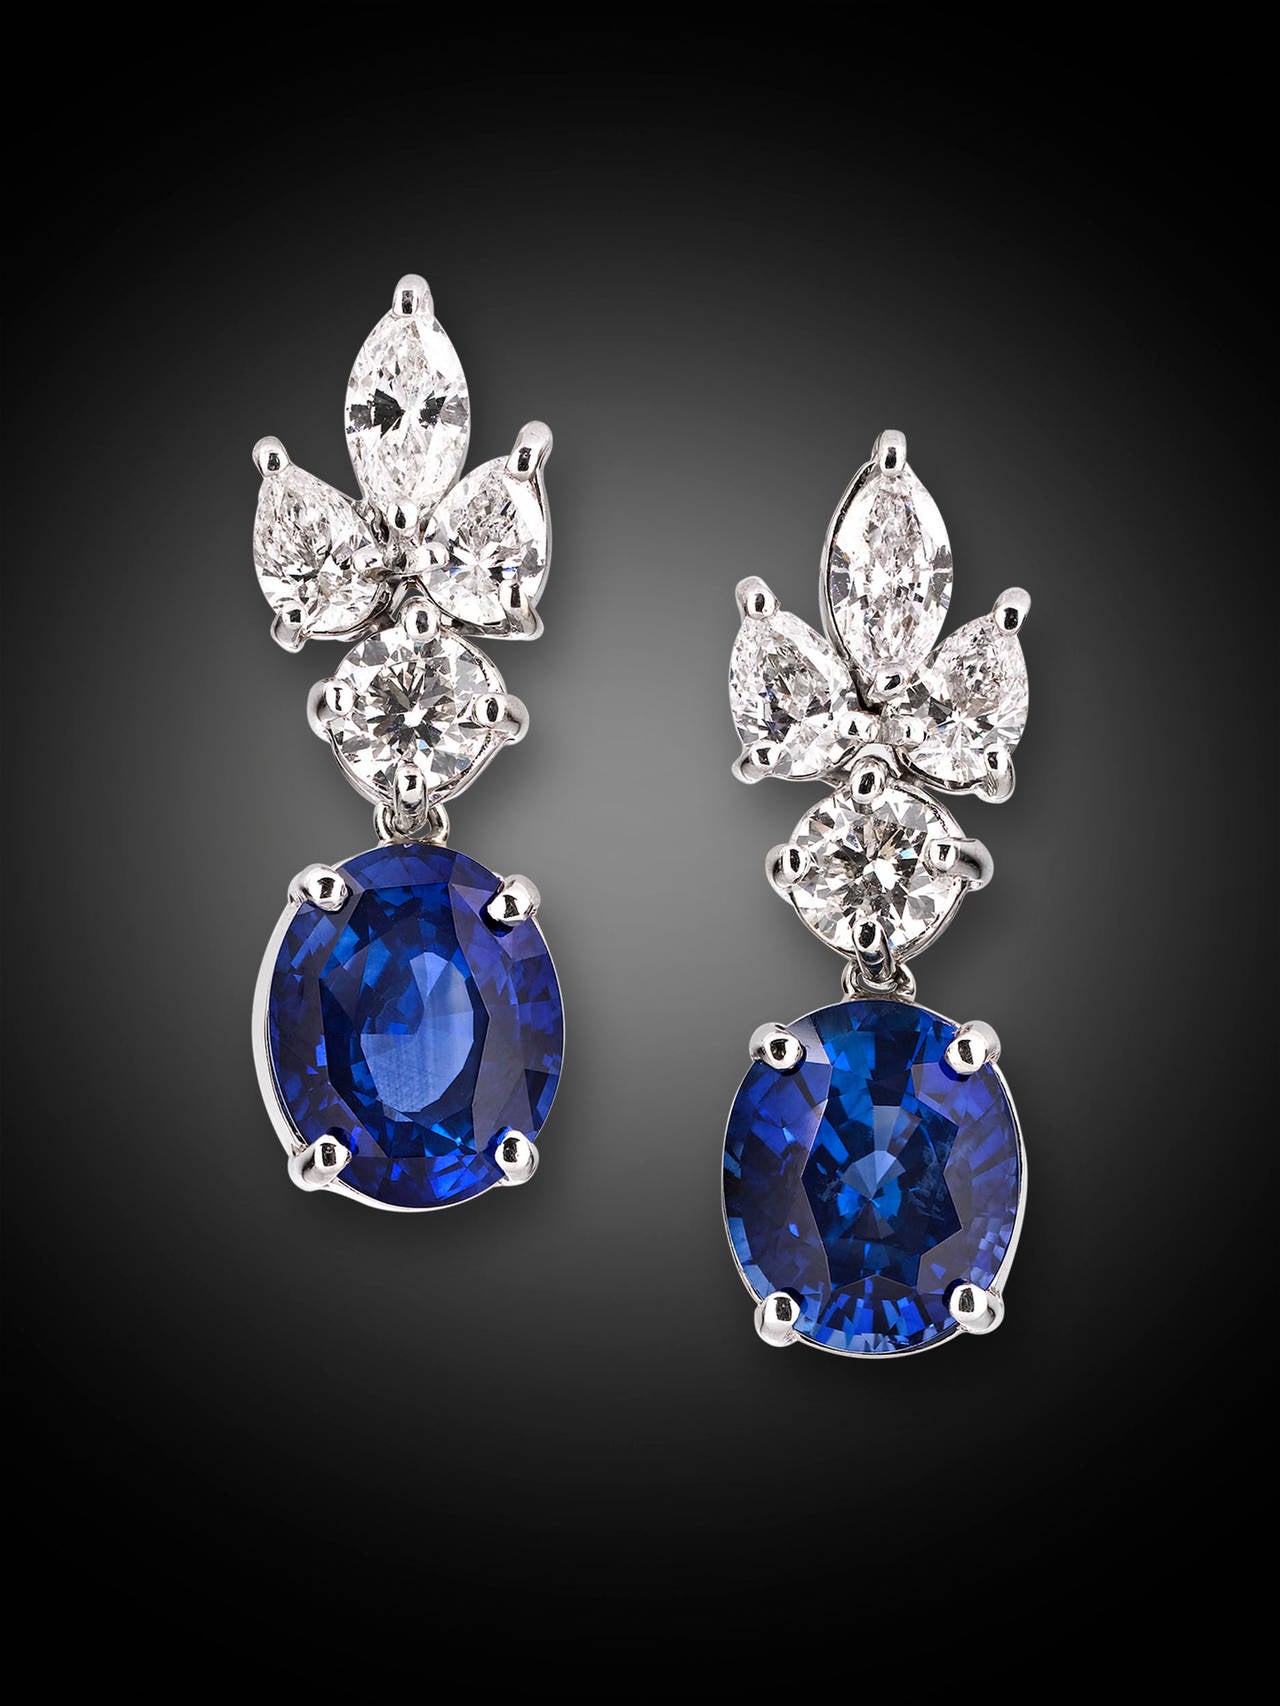 A pair of glorious blue oval sapphires dangle gracefully from these stylish and classic drop earrings. Weighing 8.20 total carats, these blue jewels are joined by 2.42 carats of marquise, pear and round-cut white diamonds in their 18K white gold